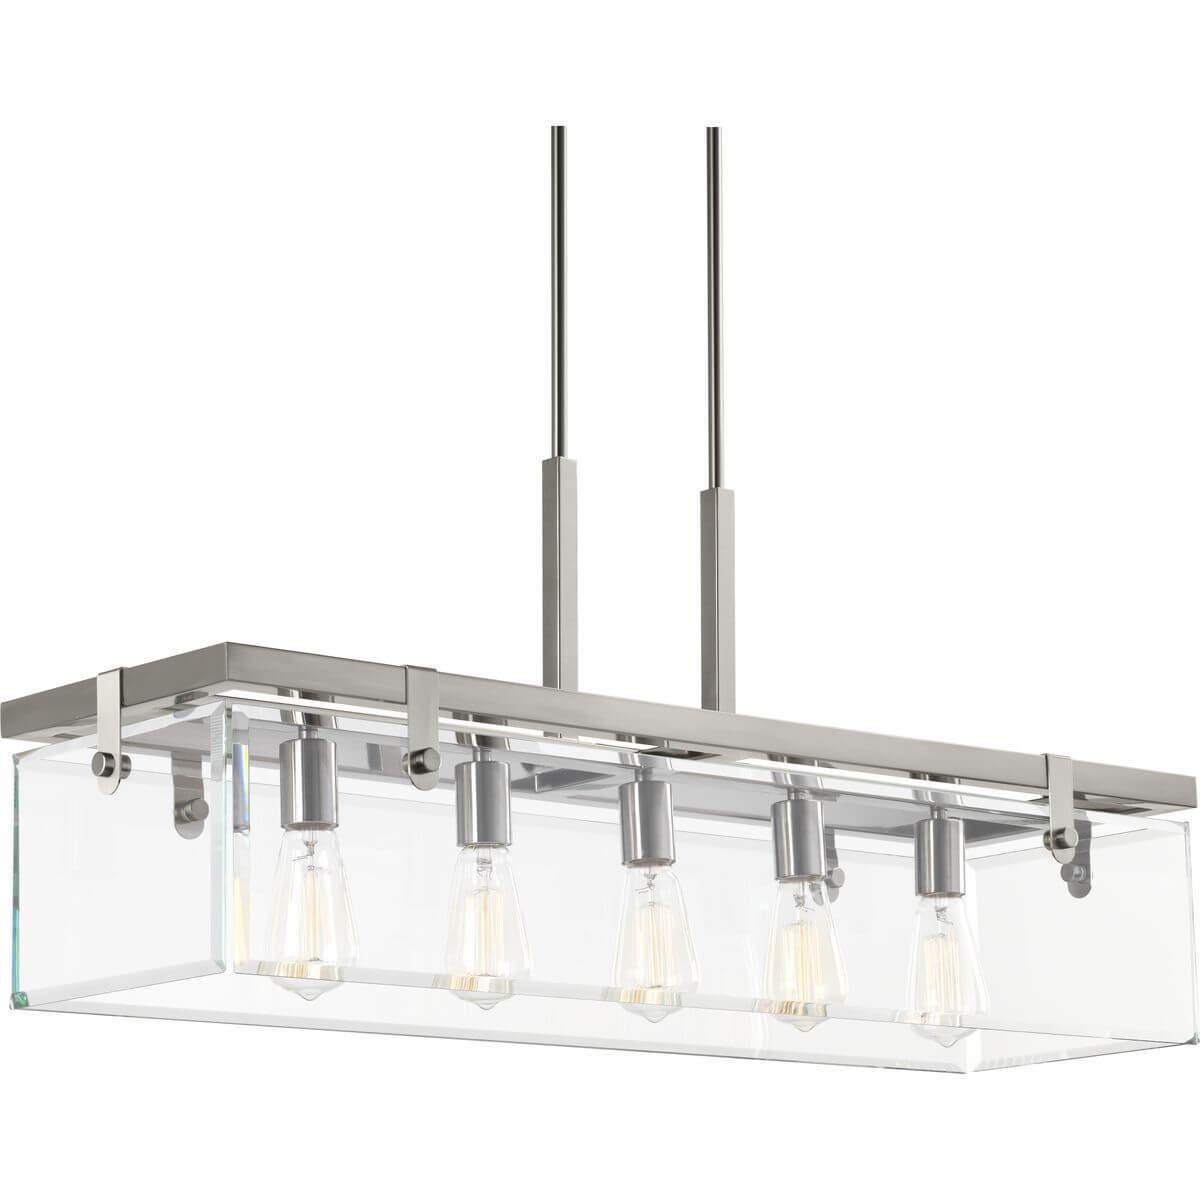 Progress Lighting Glayse 5 Light 37 inch Linear Light in Brushed Nickel with Clear Glass P400116-009